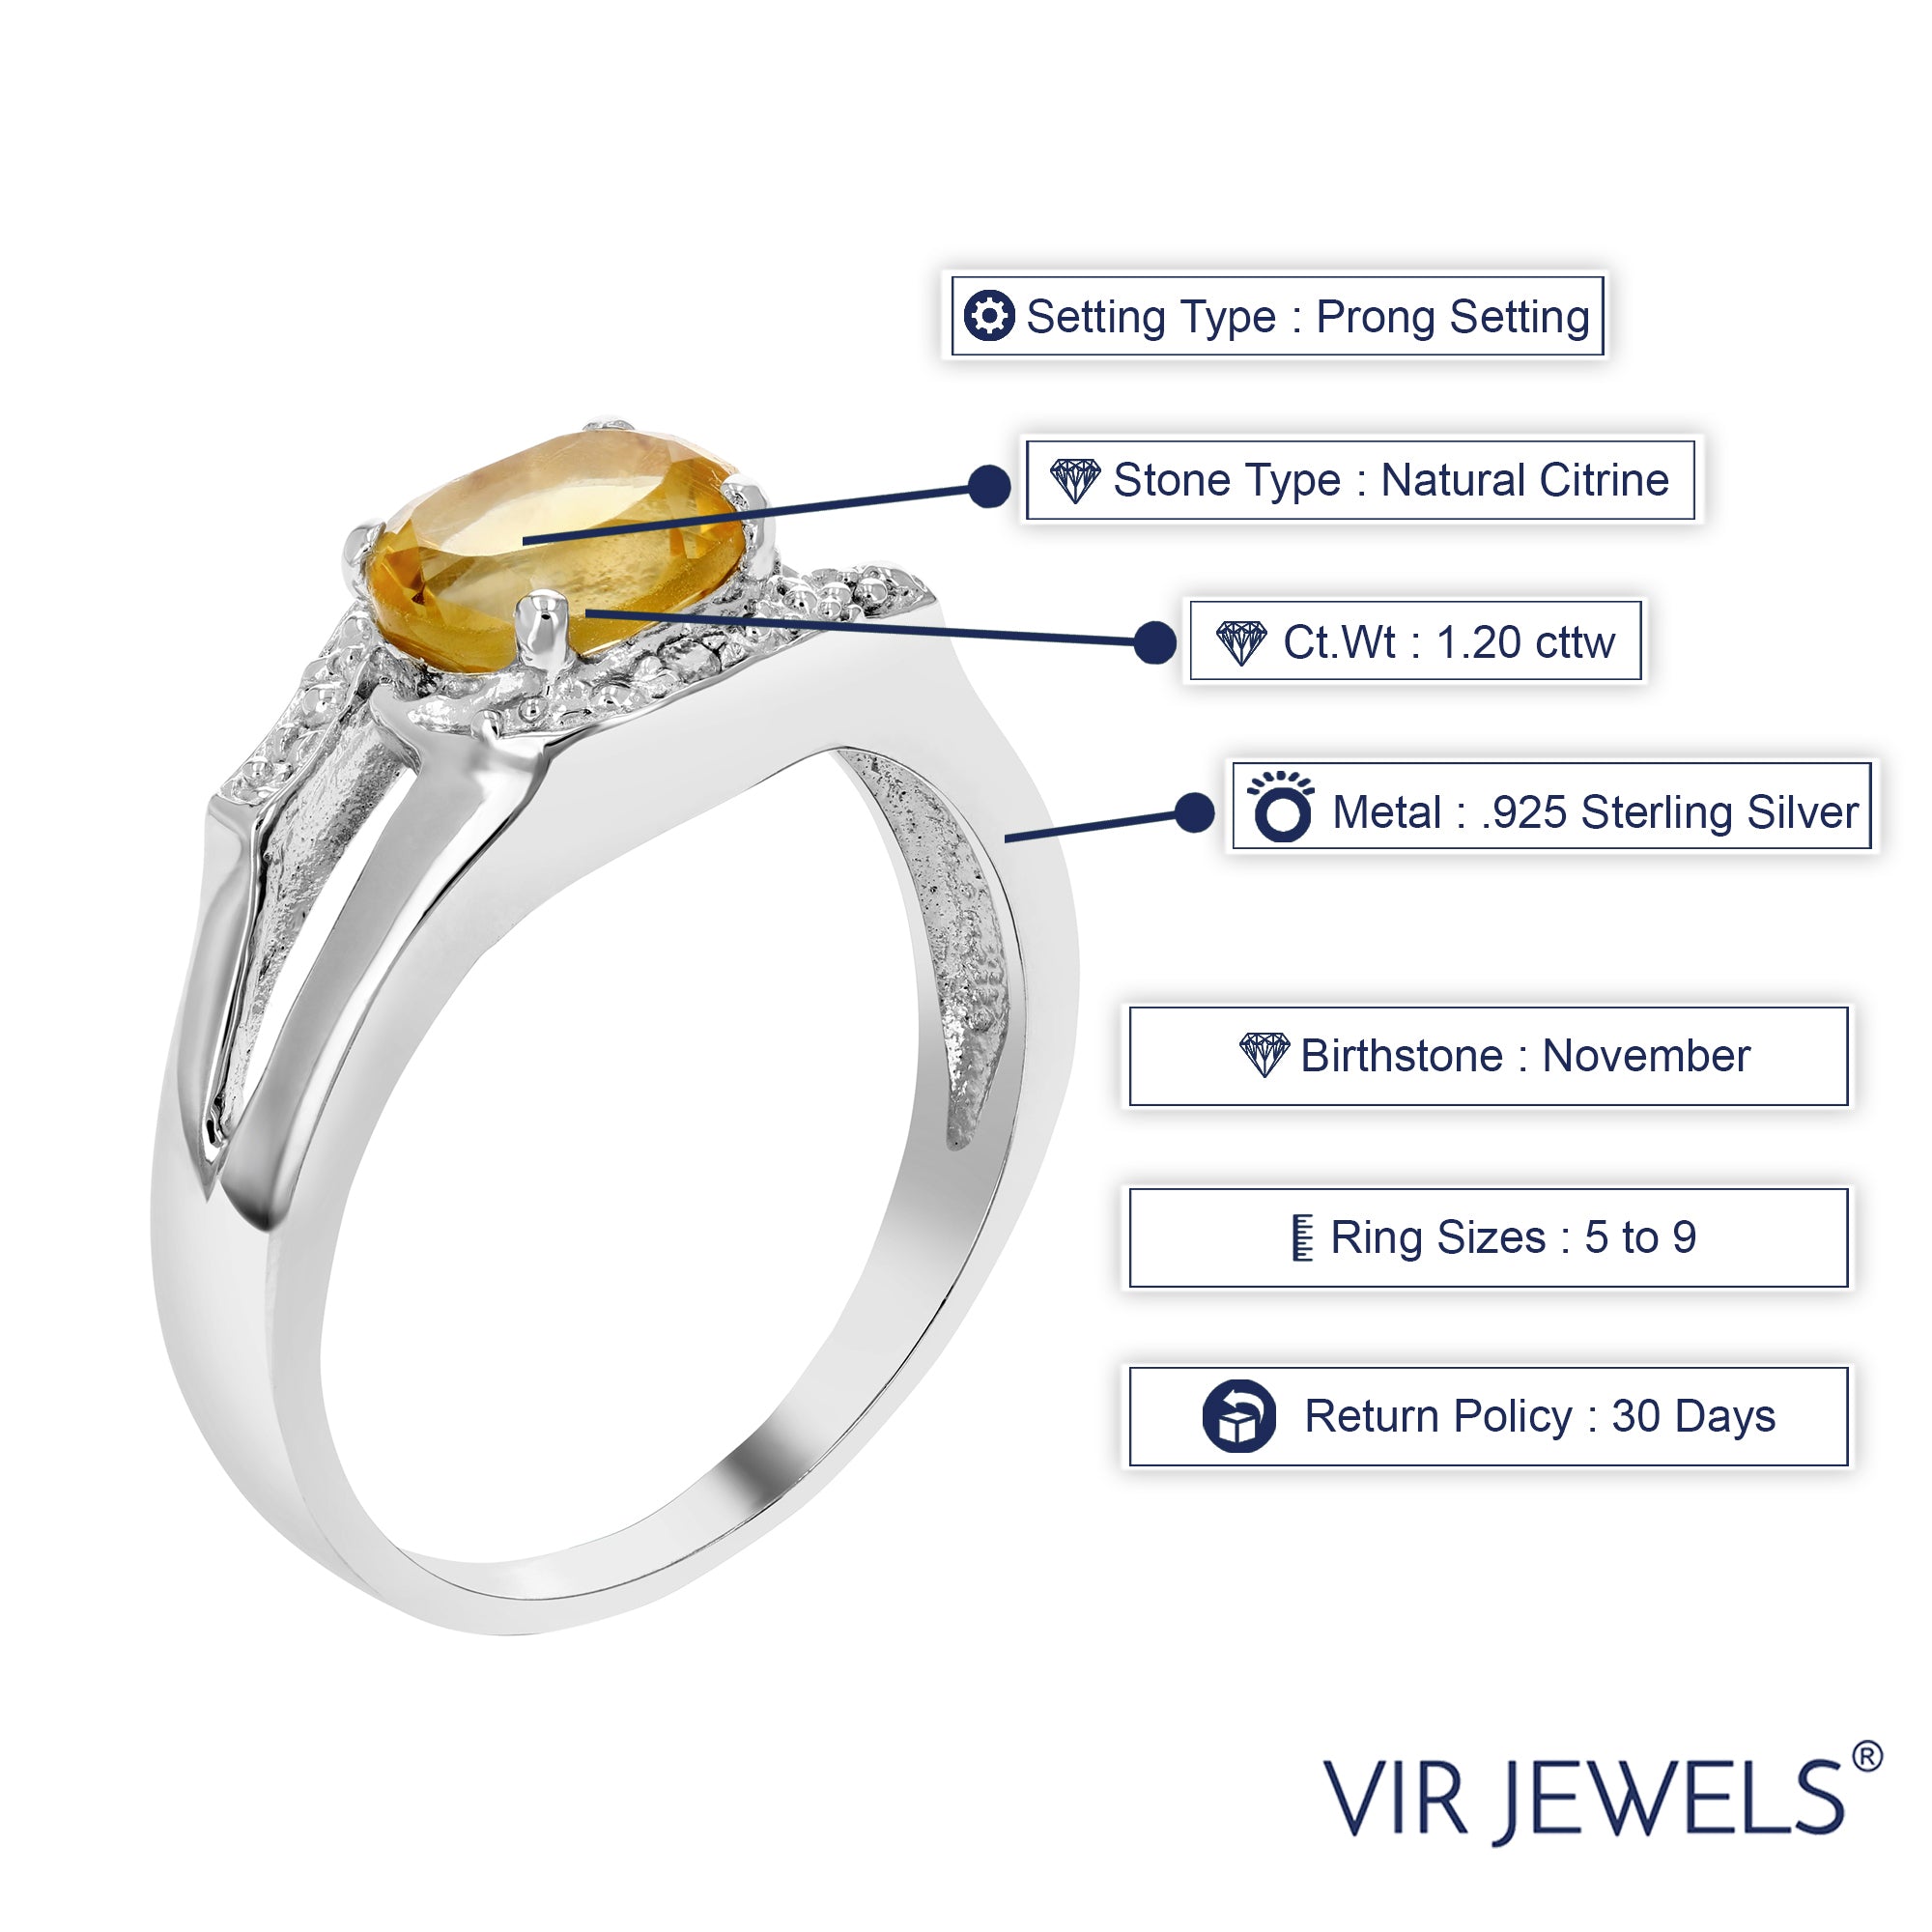 1.20 cttw Oval Shape Citrine Ring in .925 Sterling Silver with Rhodium Plating